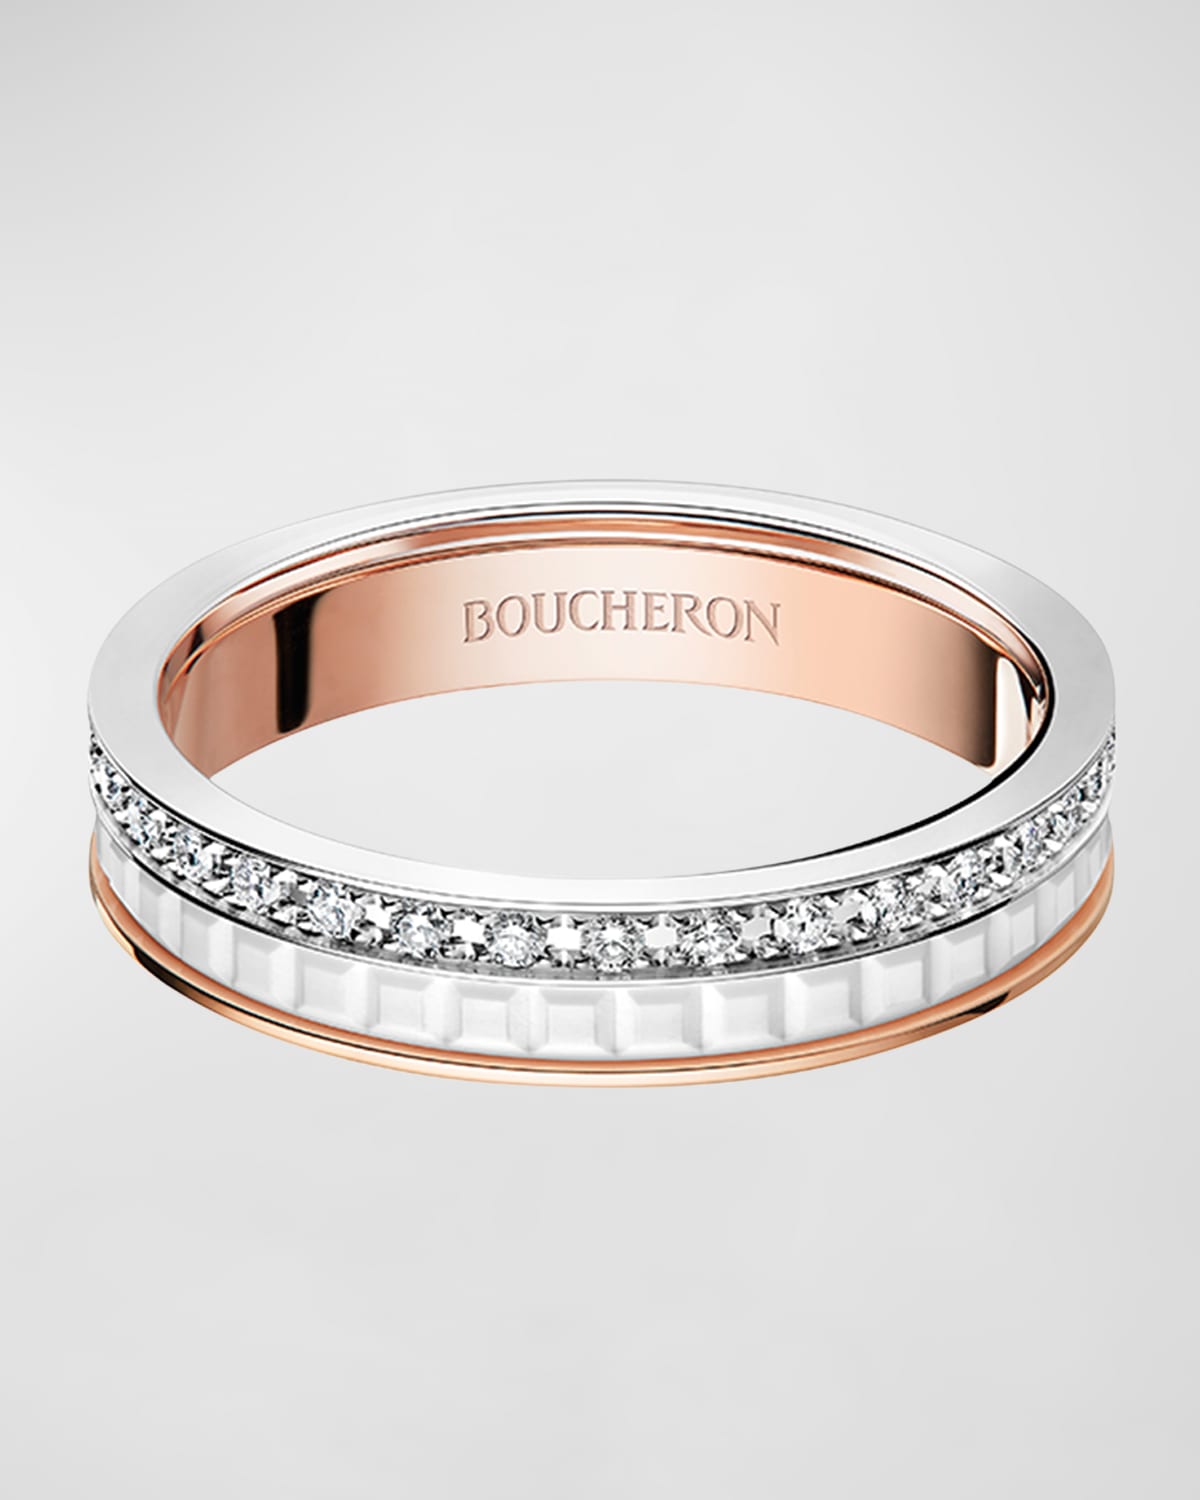 Quatre White Edition Ring in White Gold and Pink Gold, Size 52